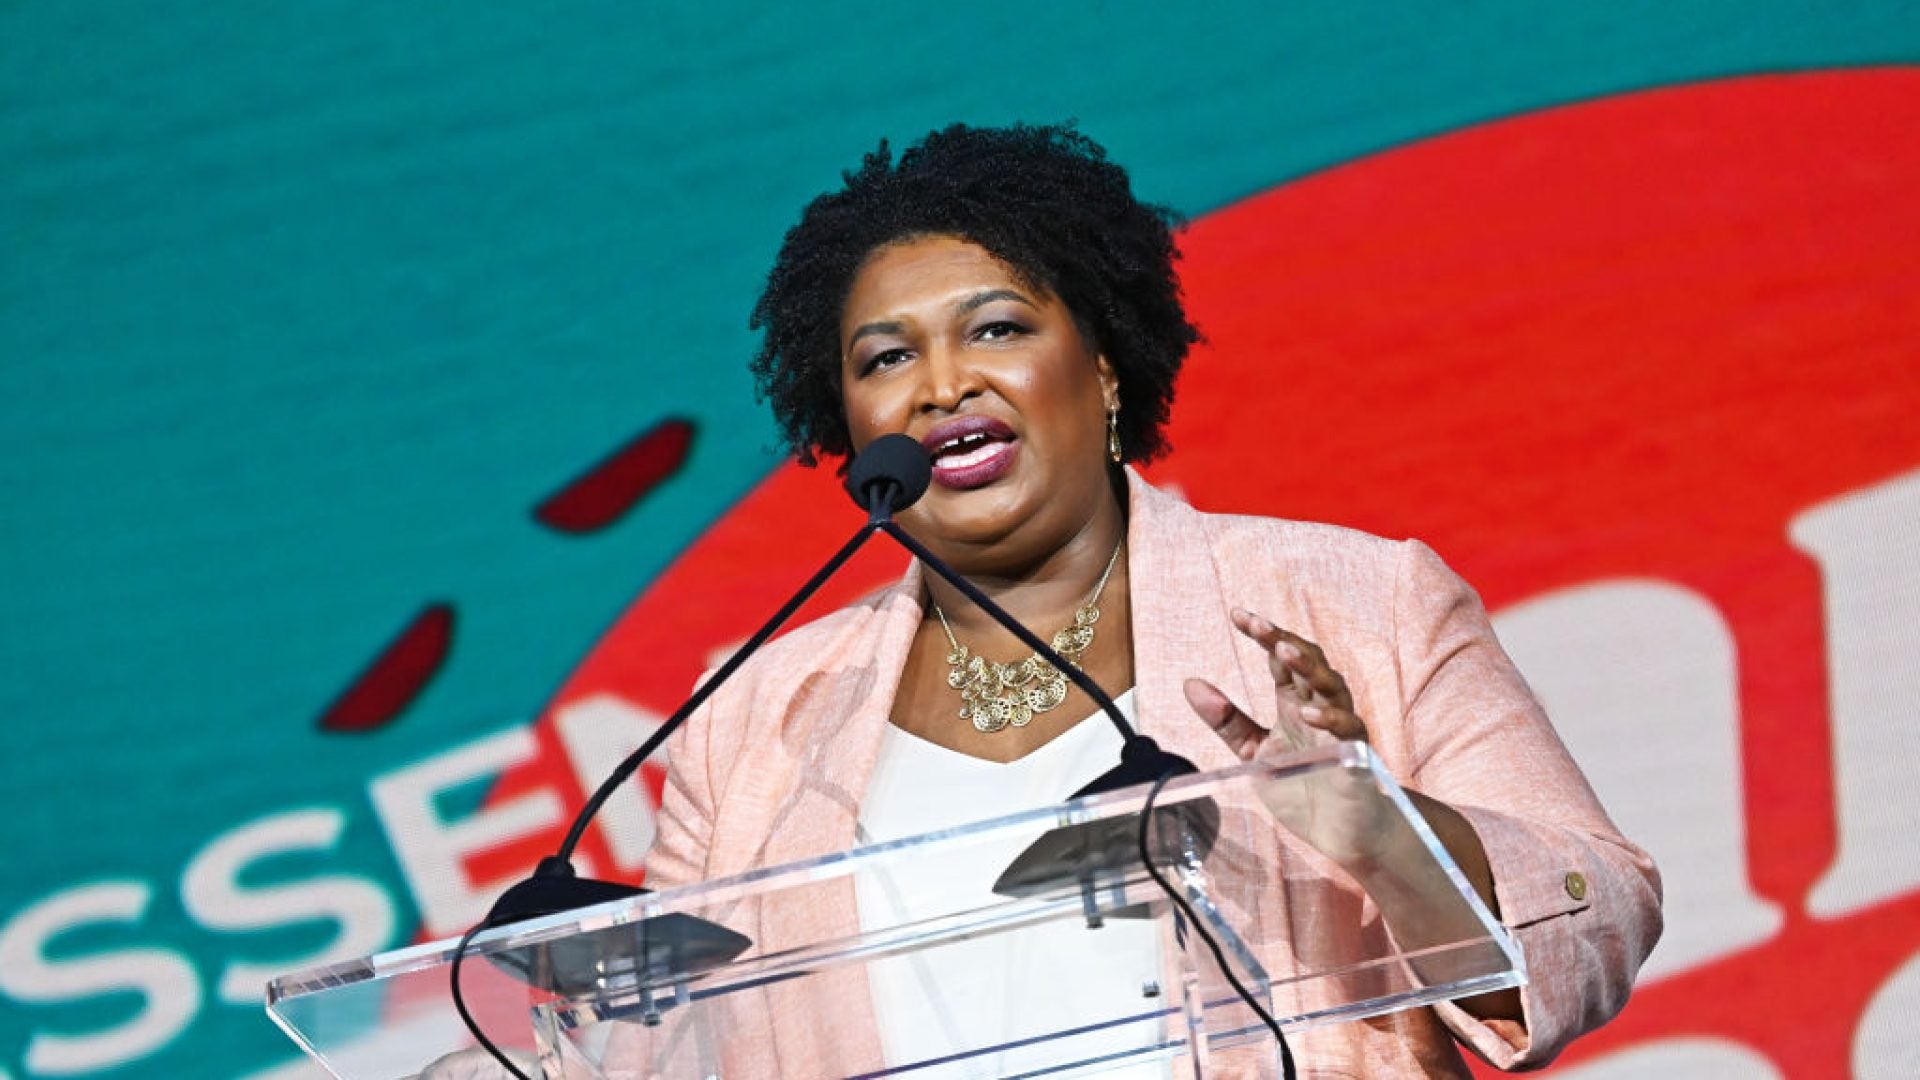 Stacey Abrams Heads To Howard University As Its First Chair For Race And Black Politics